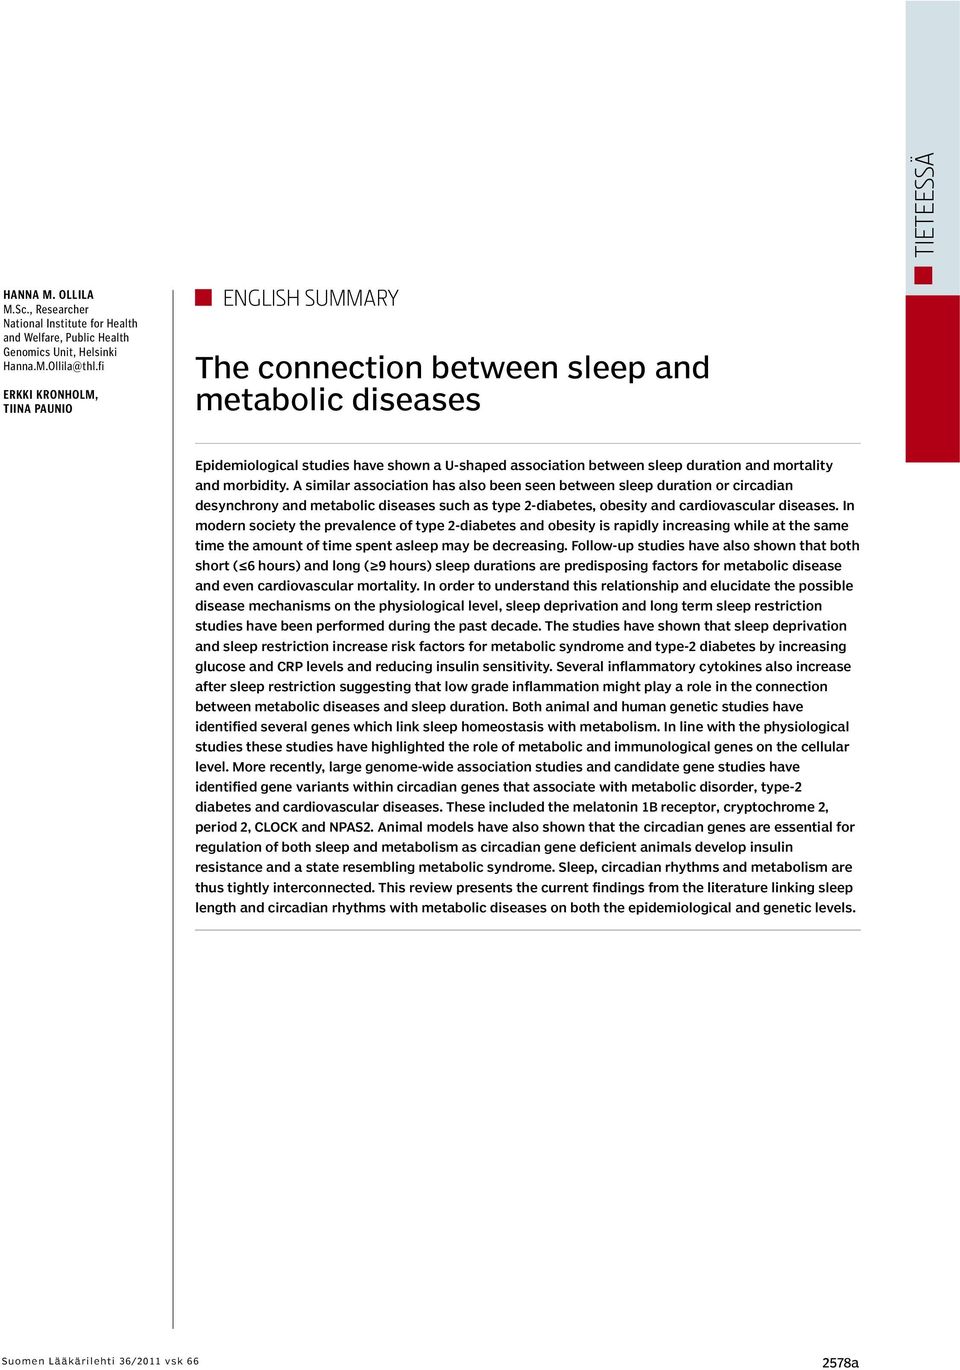 morbidity. A similar association has also been seen between sleep duration or circadian desynchrony and metabolic diseases such as type 2-diabetes, obesity and cardiovascular diseases.